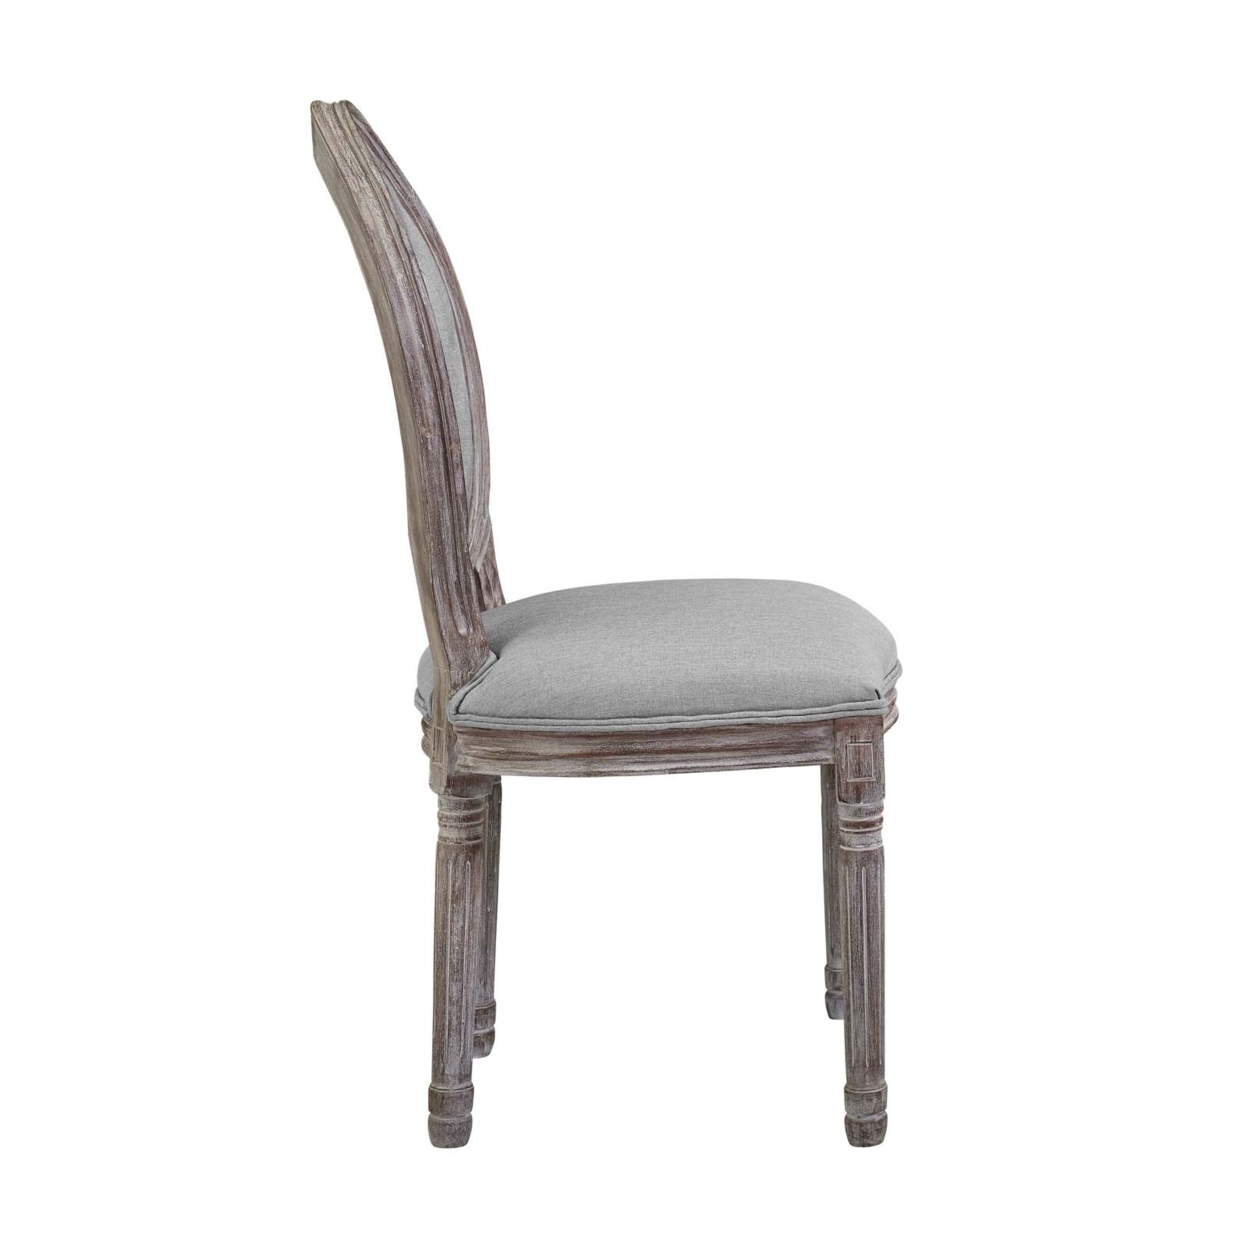 Arise Vintage French Upholstered Fabric Dining Side Chair Set Of 2,Light Gray